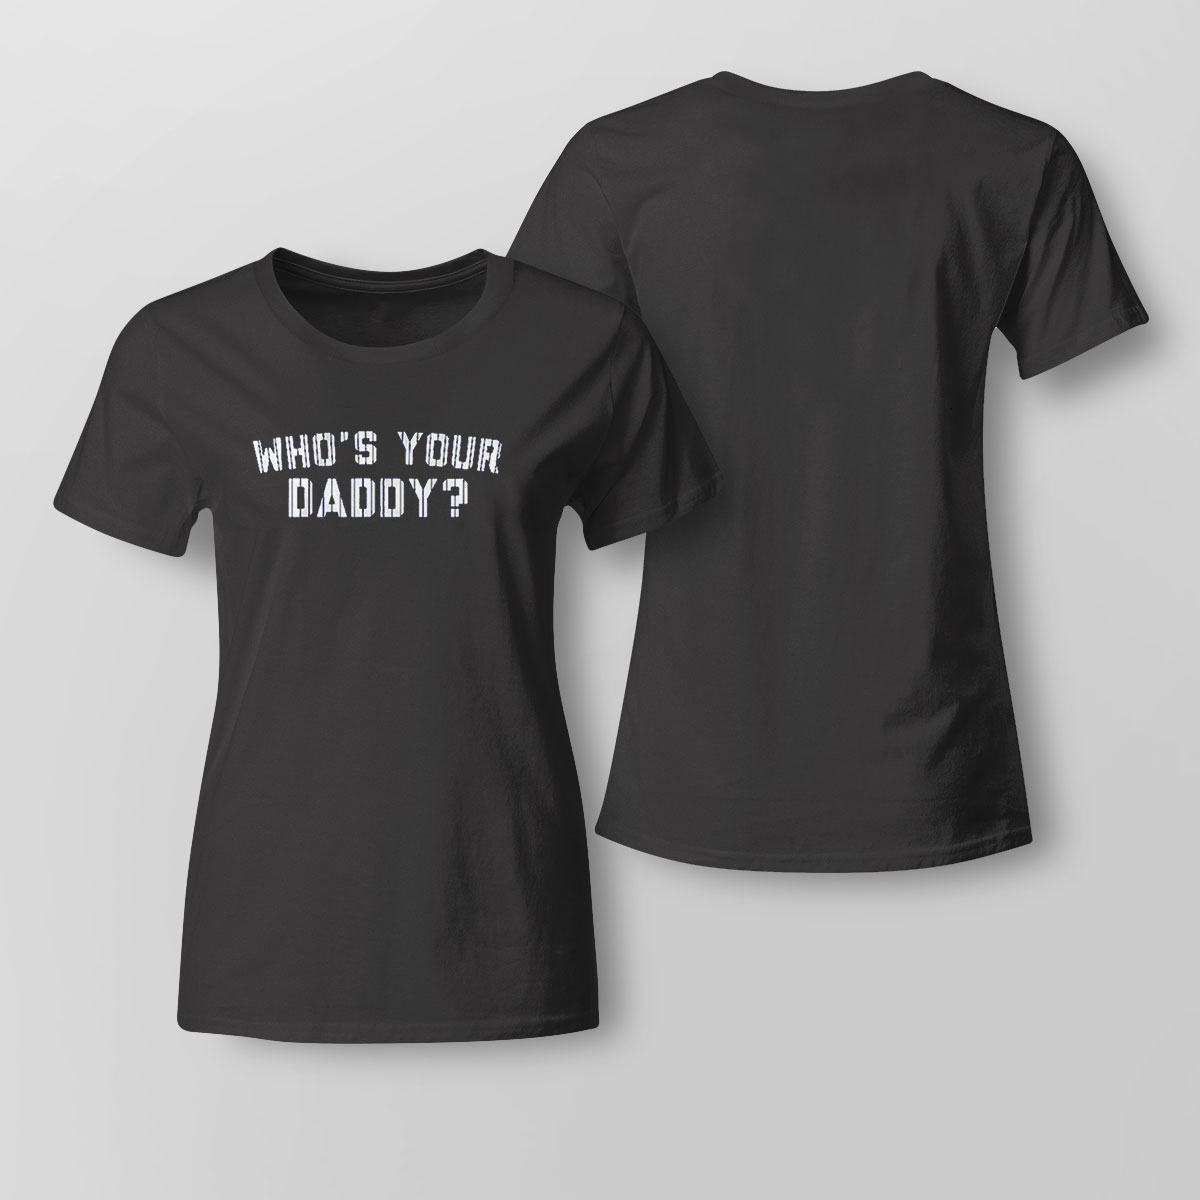 Whos Your Daddy Shirt Long Sleeve, Tank Top